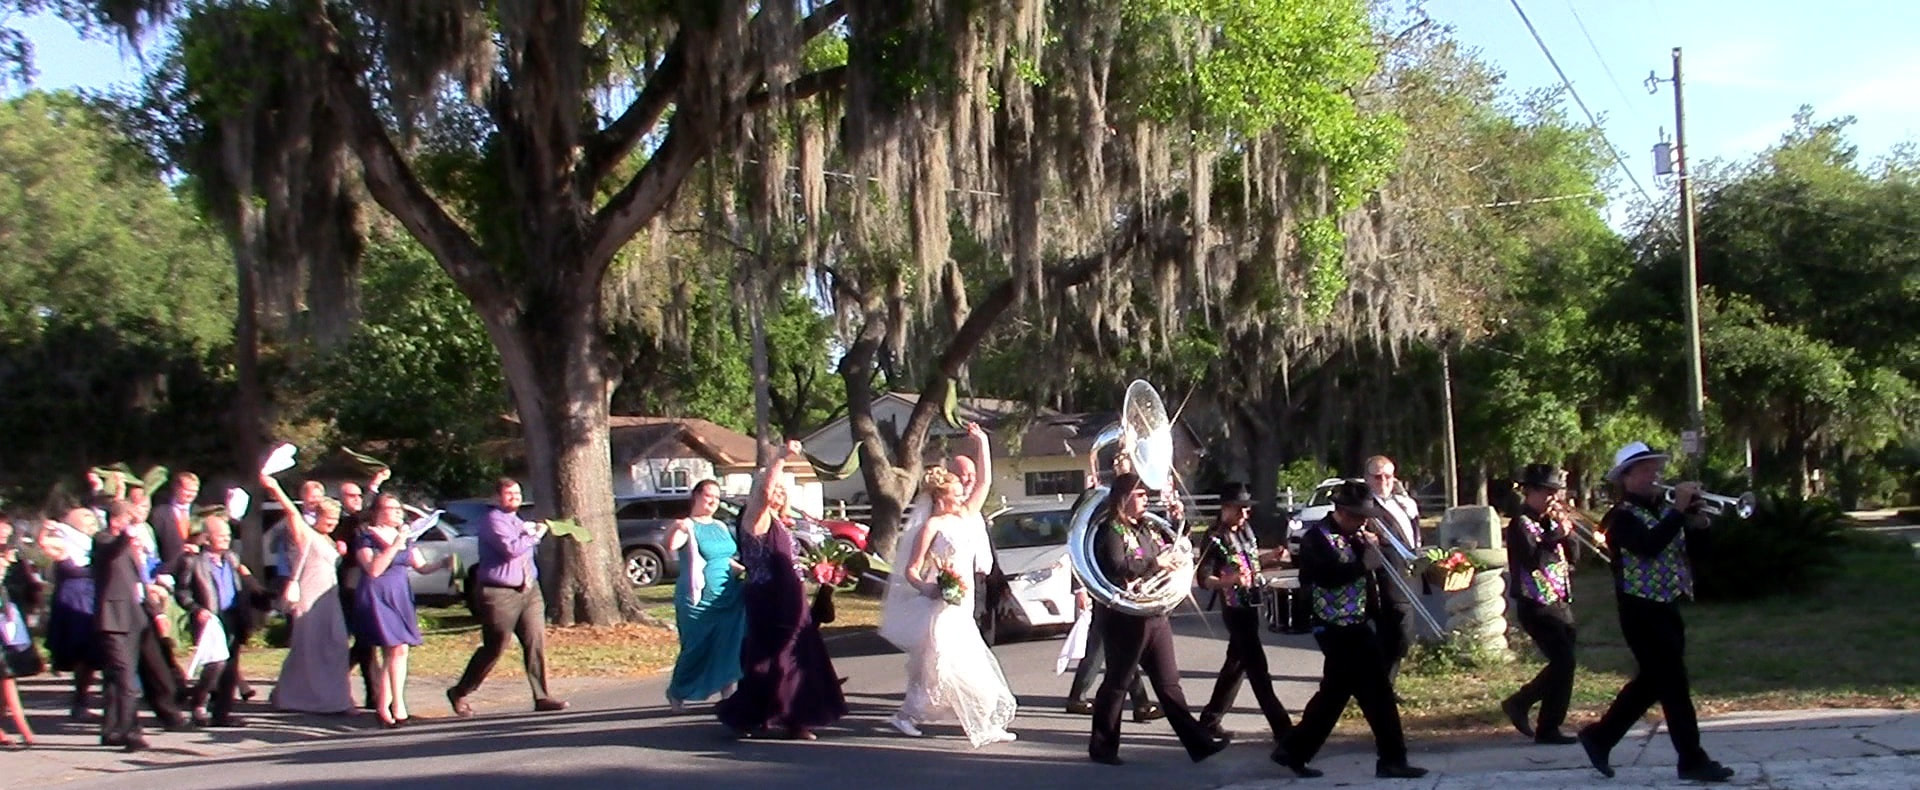 The Real Deal Brass Band, second line, wedding parade available in Tampa, St. Petersburg, Clearwater, Ybor City, Brooksville, Florida. 